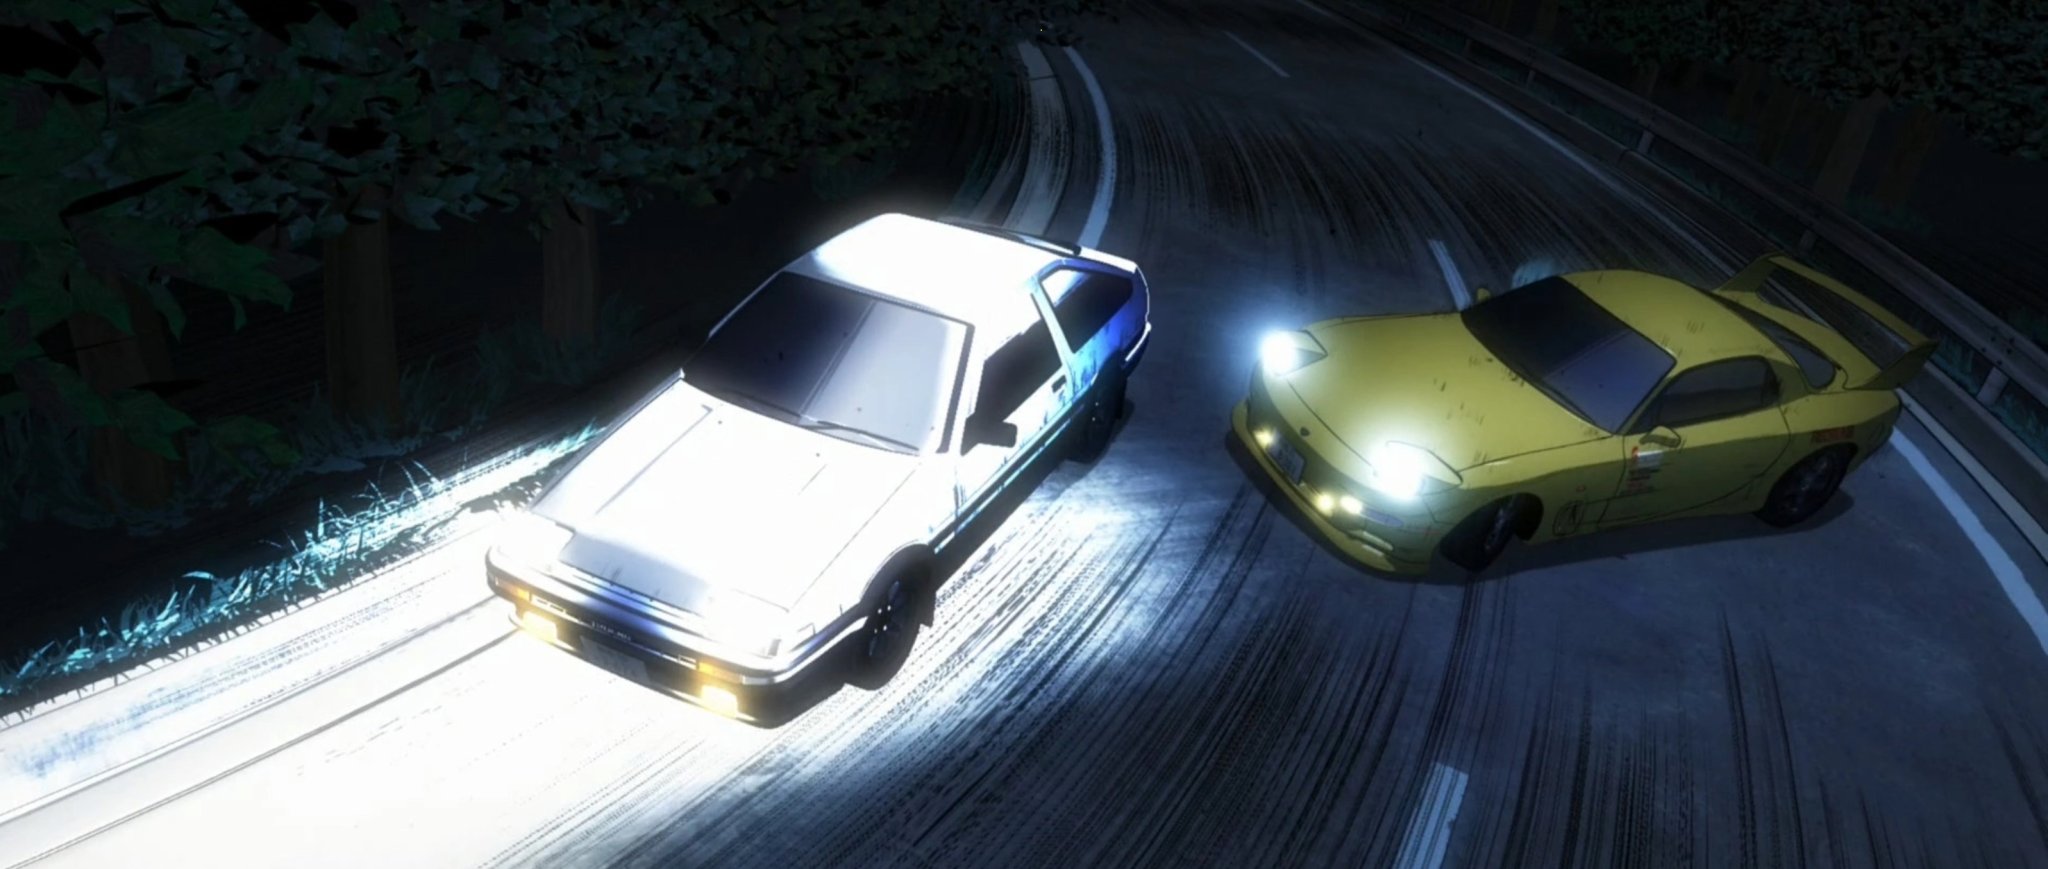 Initial D - First Stage - Serie TV 1998 - Manga news